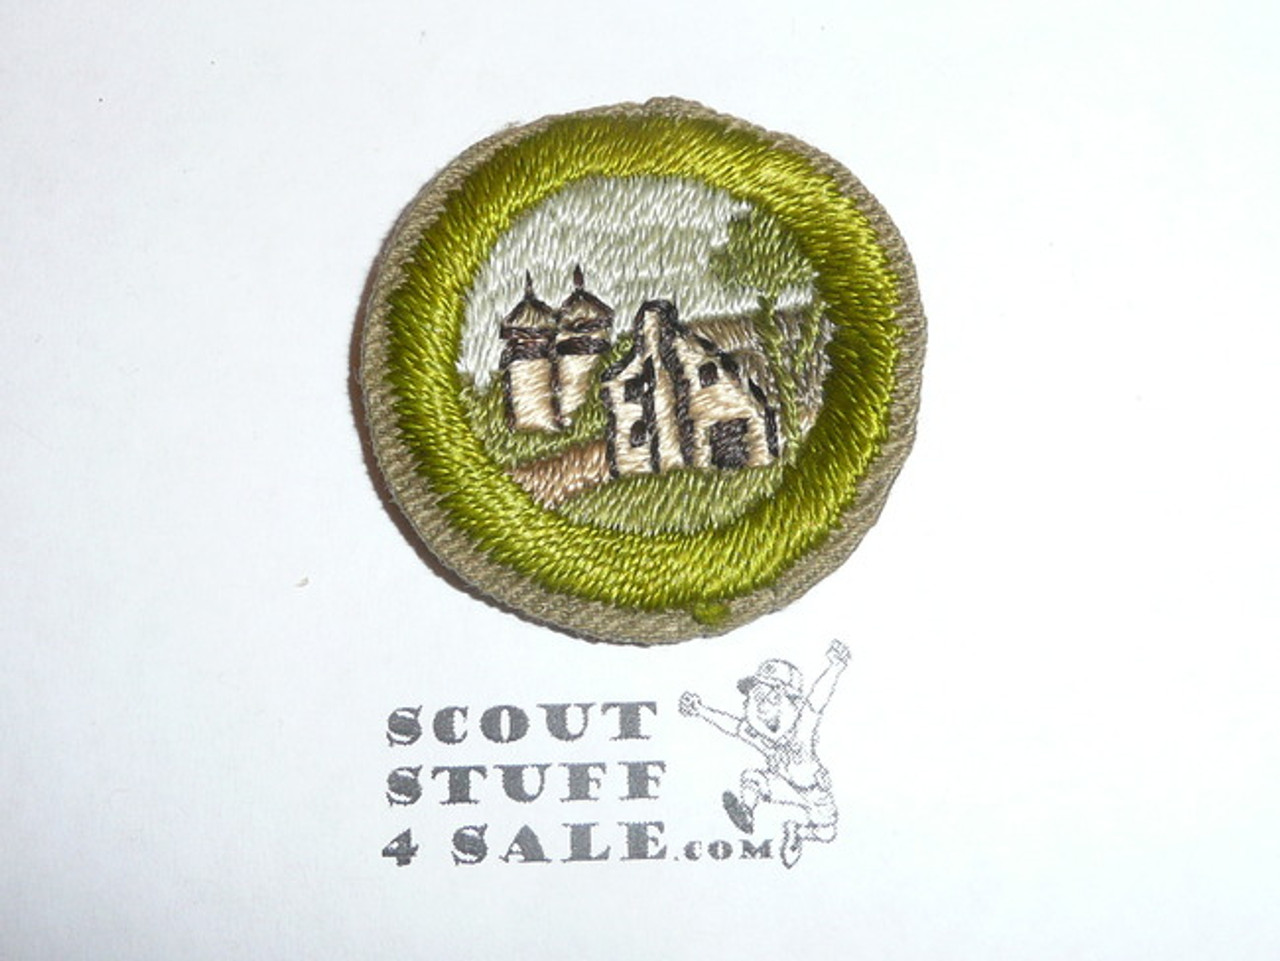 Farm Home and its Planning - Type C - Tan Crimped Merit Badge (1936-1946), was sewn but in very good condition